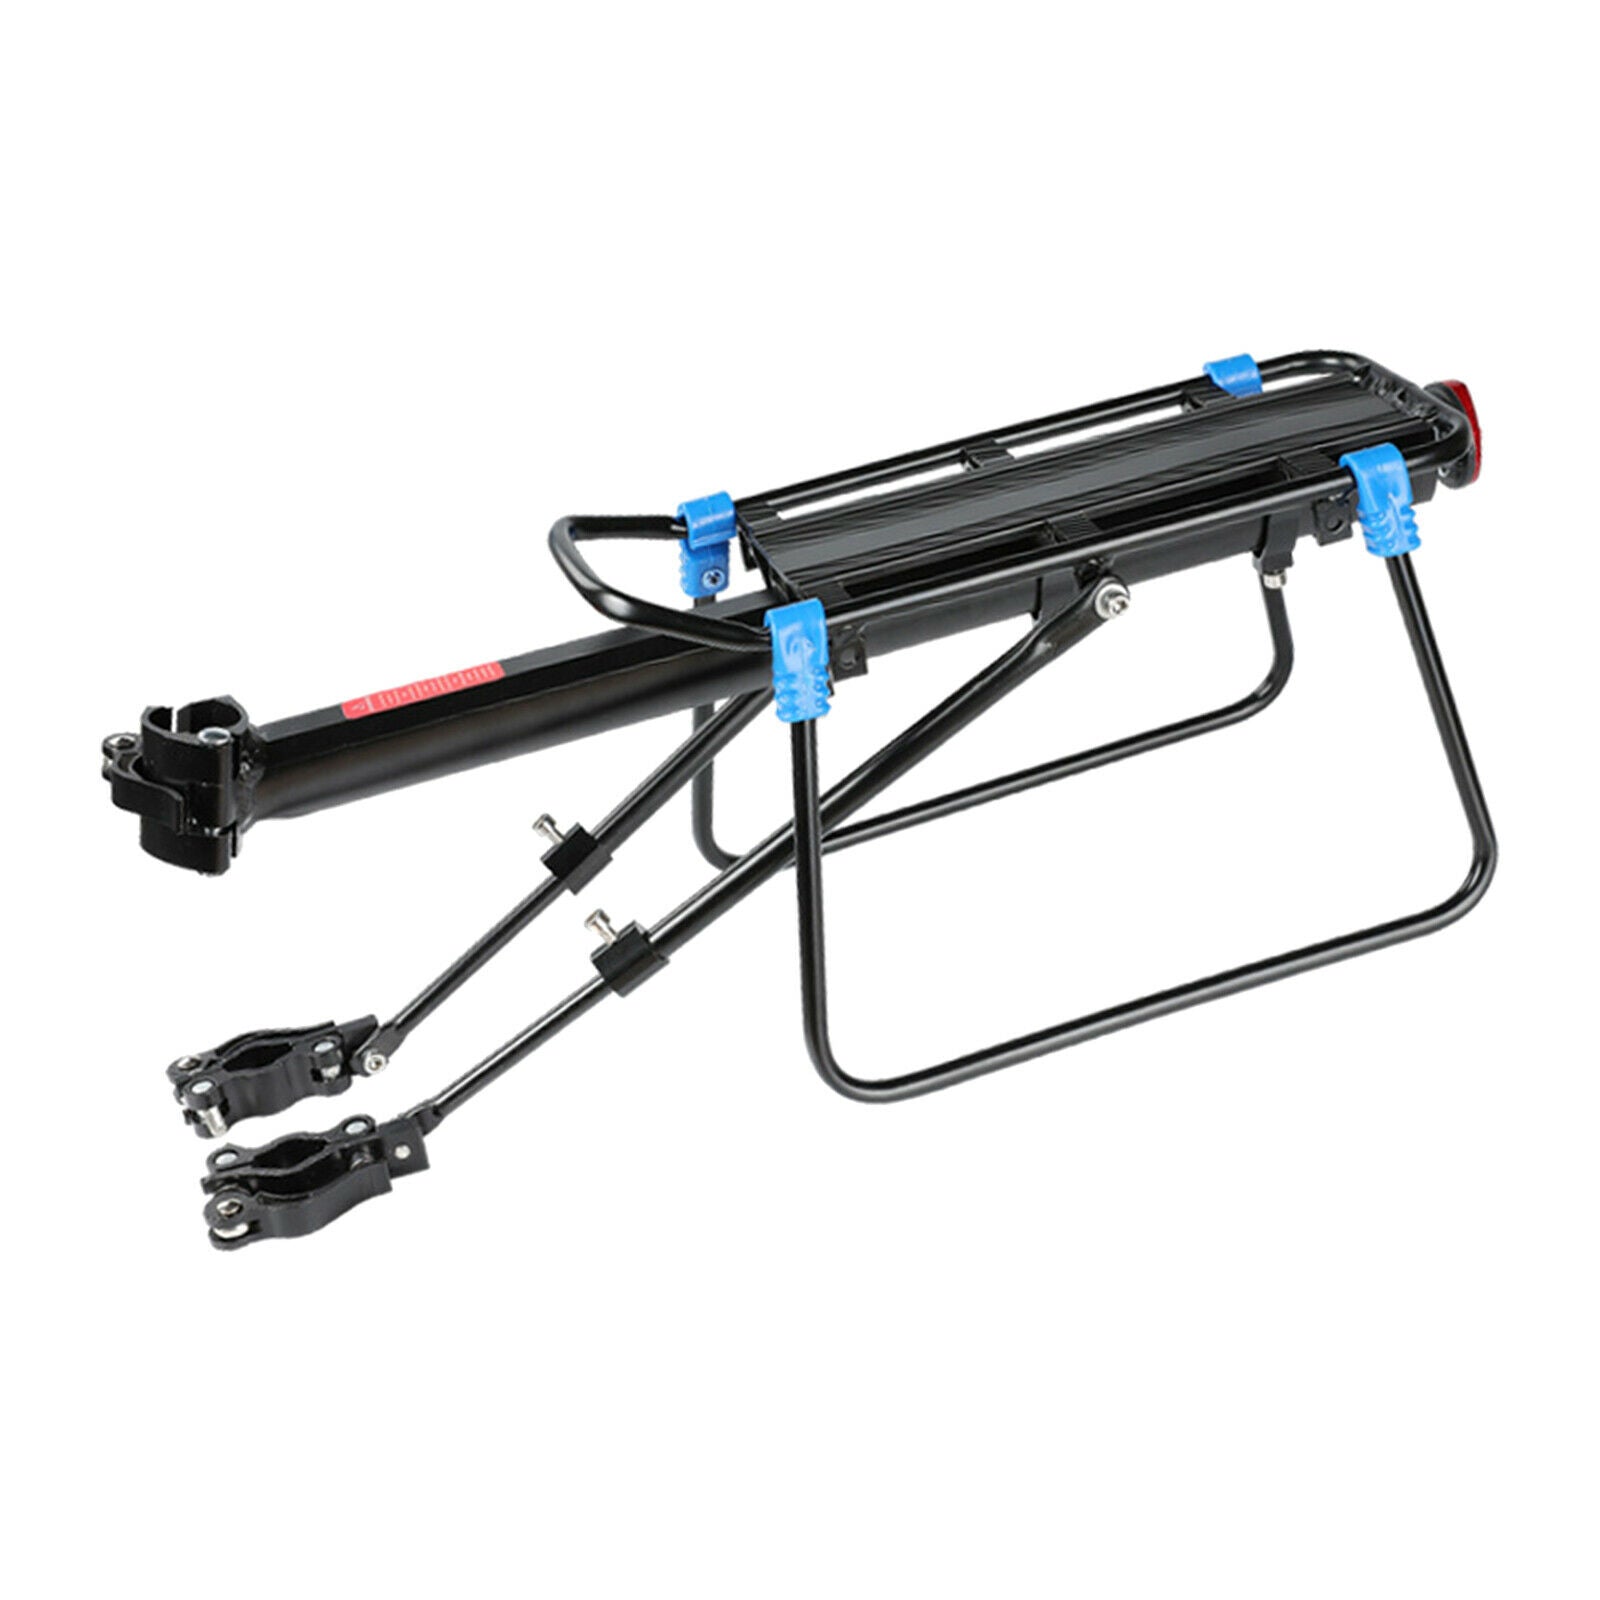 Alloy Bicycle Rear Pannier Carrier Cargo Luggage Rack Bikes With Taillight